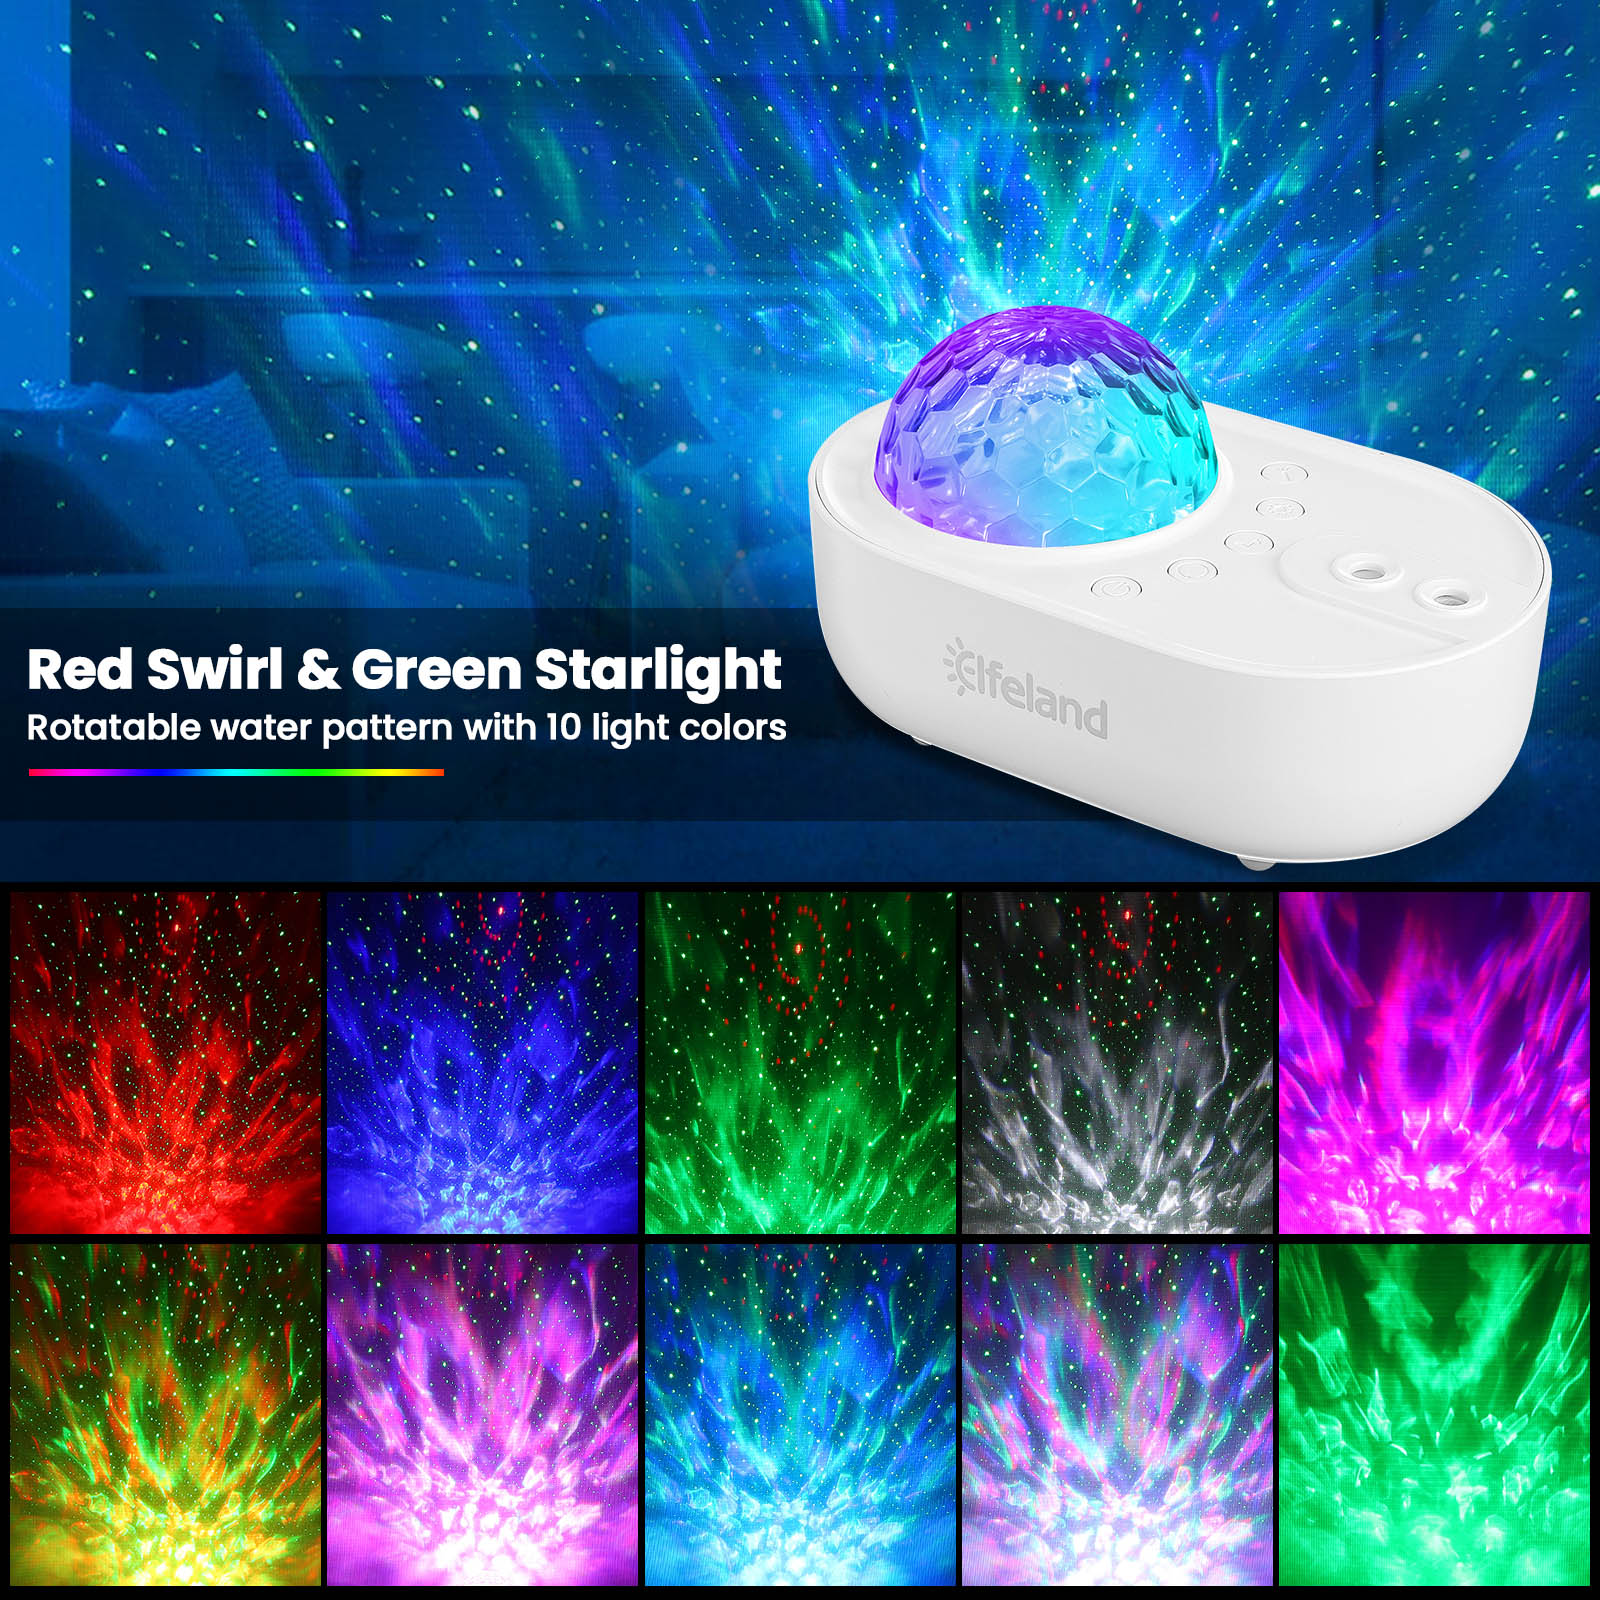 Elfeland-USB-LED-Starry-Light-Sky-Night-Galaxy-Projector-Music-Lamps-with-Remote-Control-1887025-2